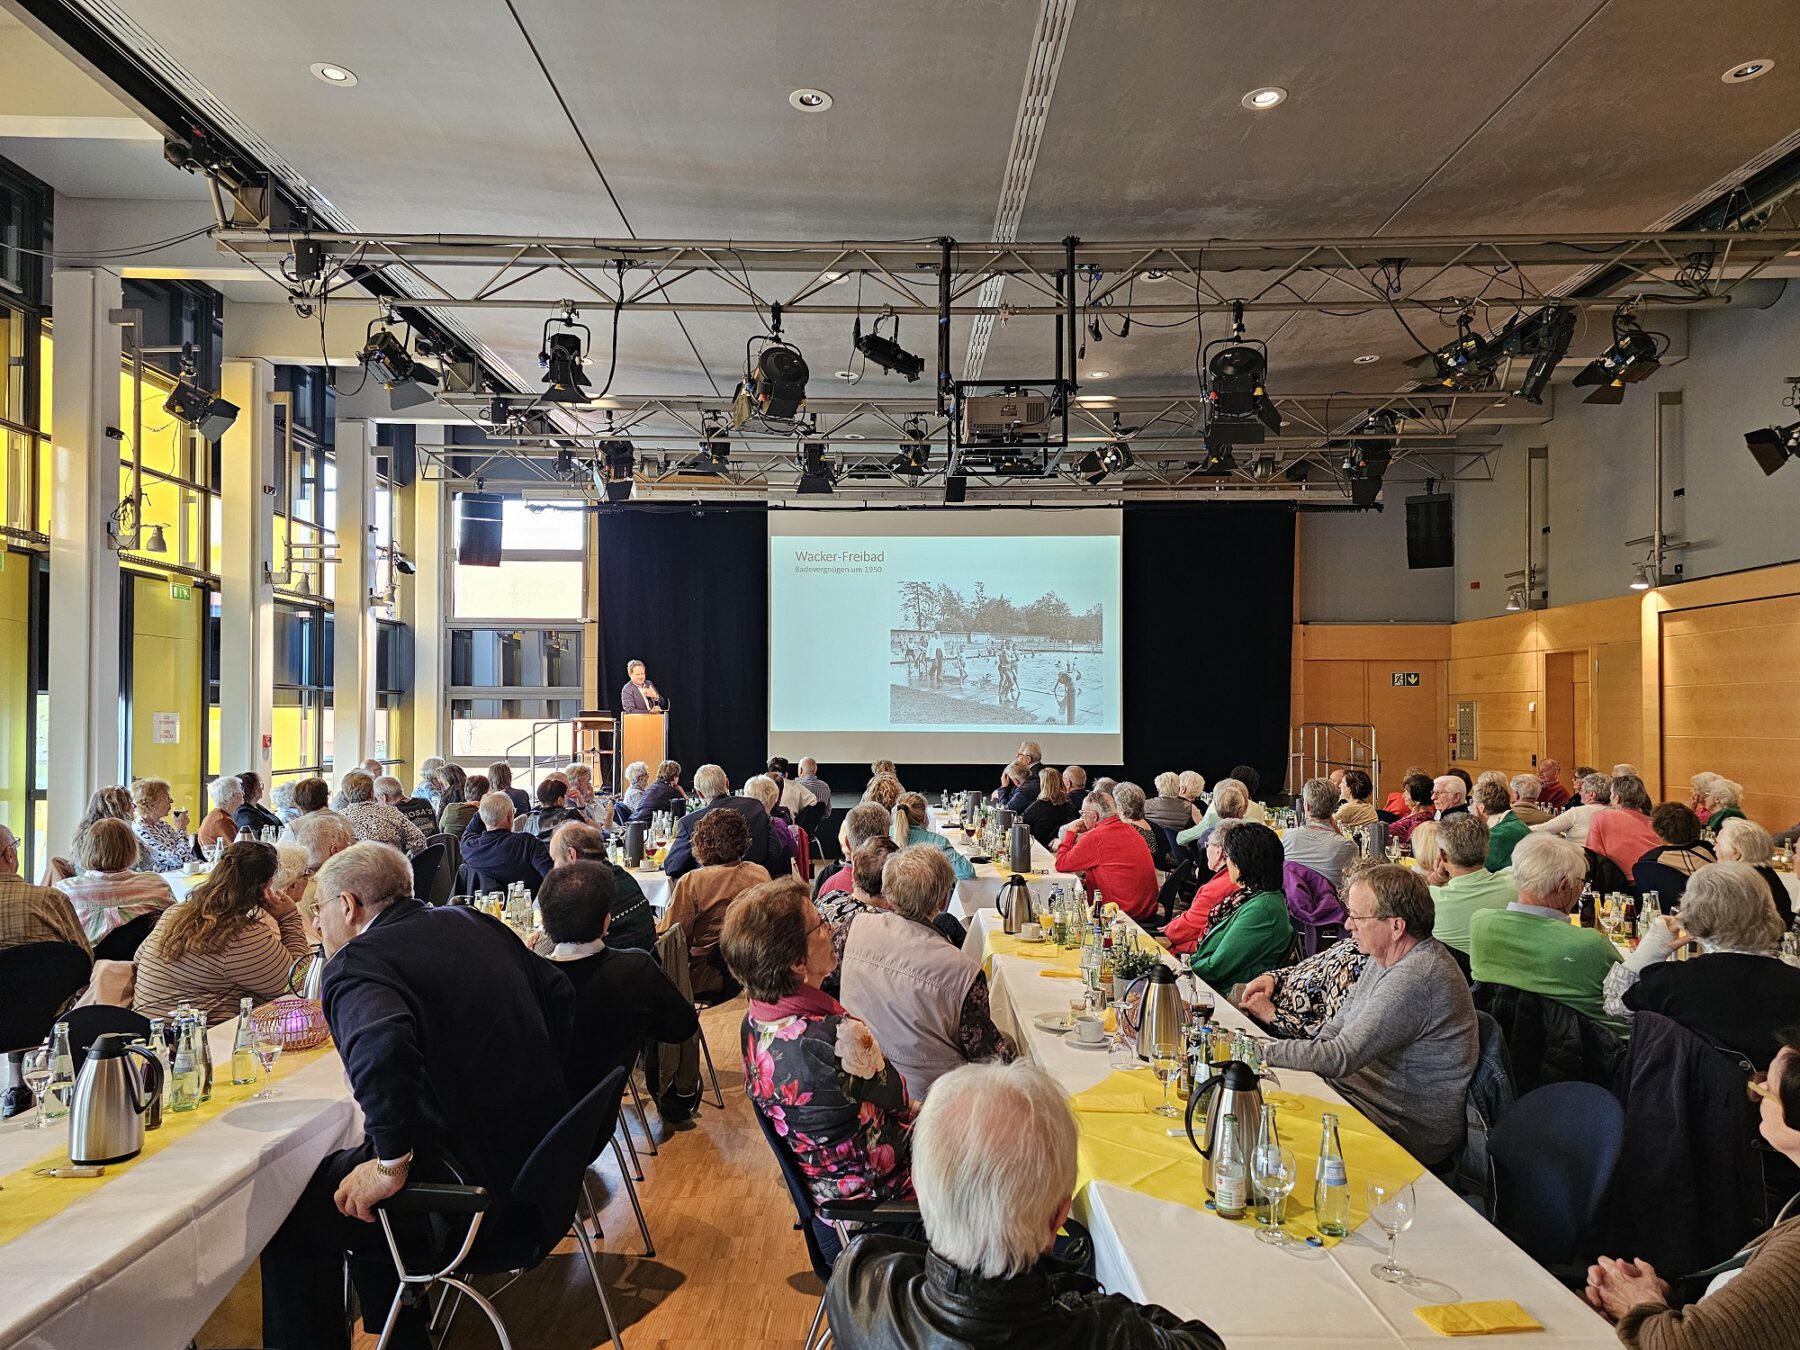 A fully occupied community hall during the senior citizens' birthday in the first quarter of 1 © Stadt Burghausen/ebh